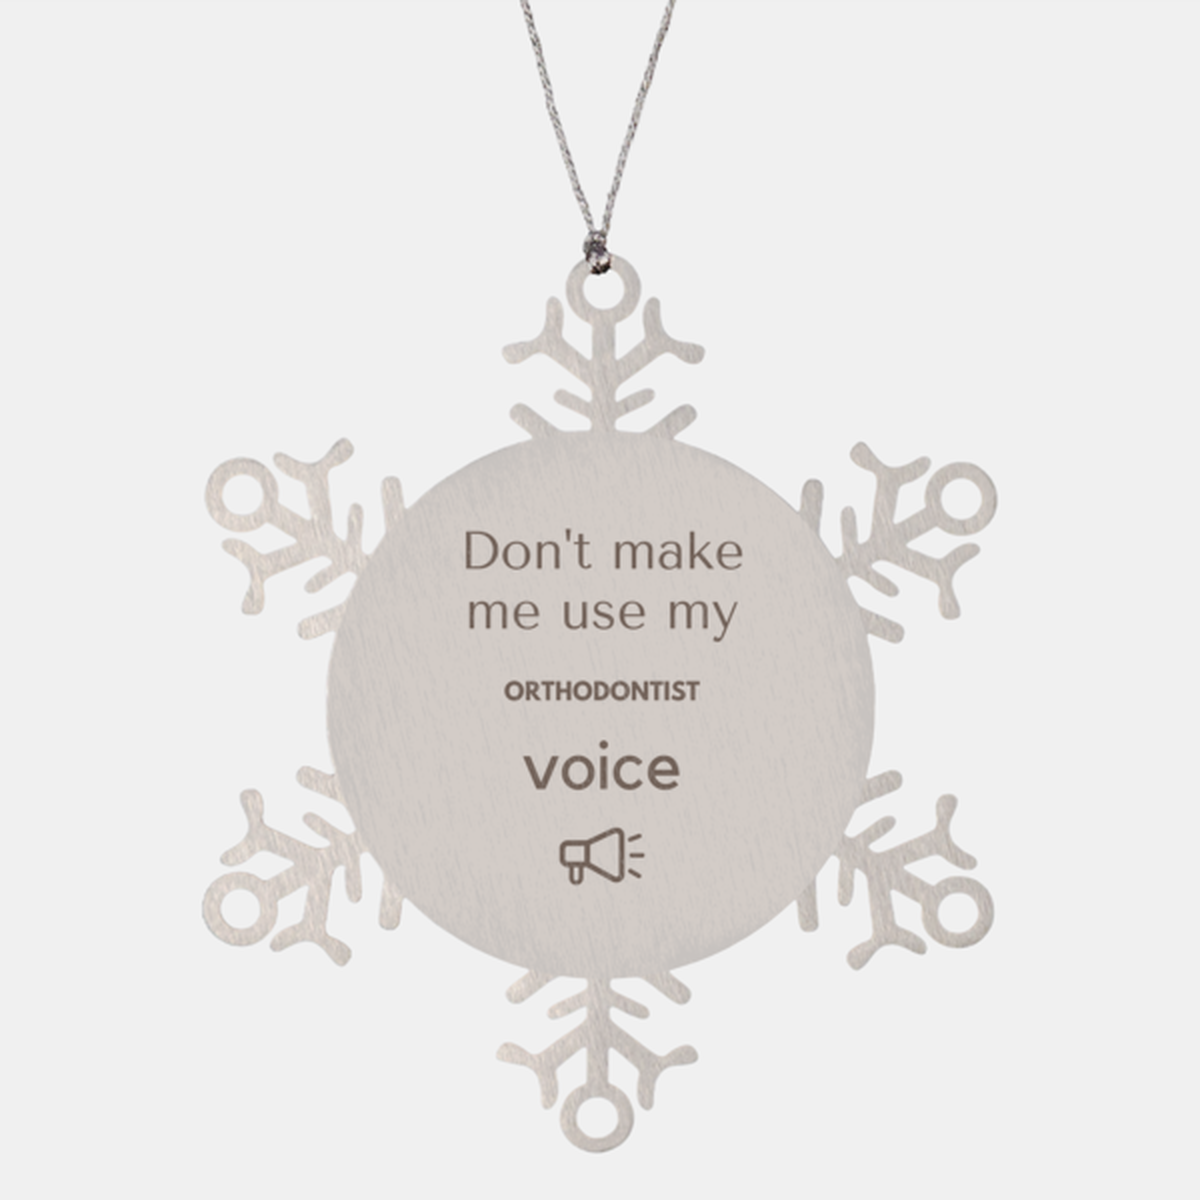 Don't make me use my Orthodontist voice, Sarcasm Orthodontist Ornament Gifts, Christmas Orthodontist Snowflake Ornament Unique Gifts For Orthodontist Coworkers, Men, Women, Colleague, Friends